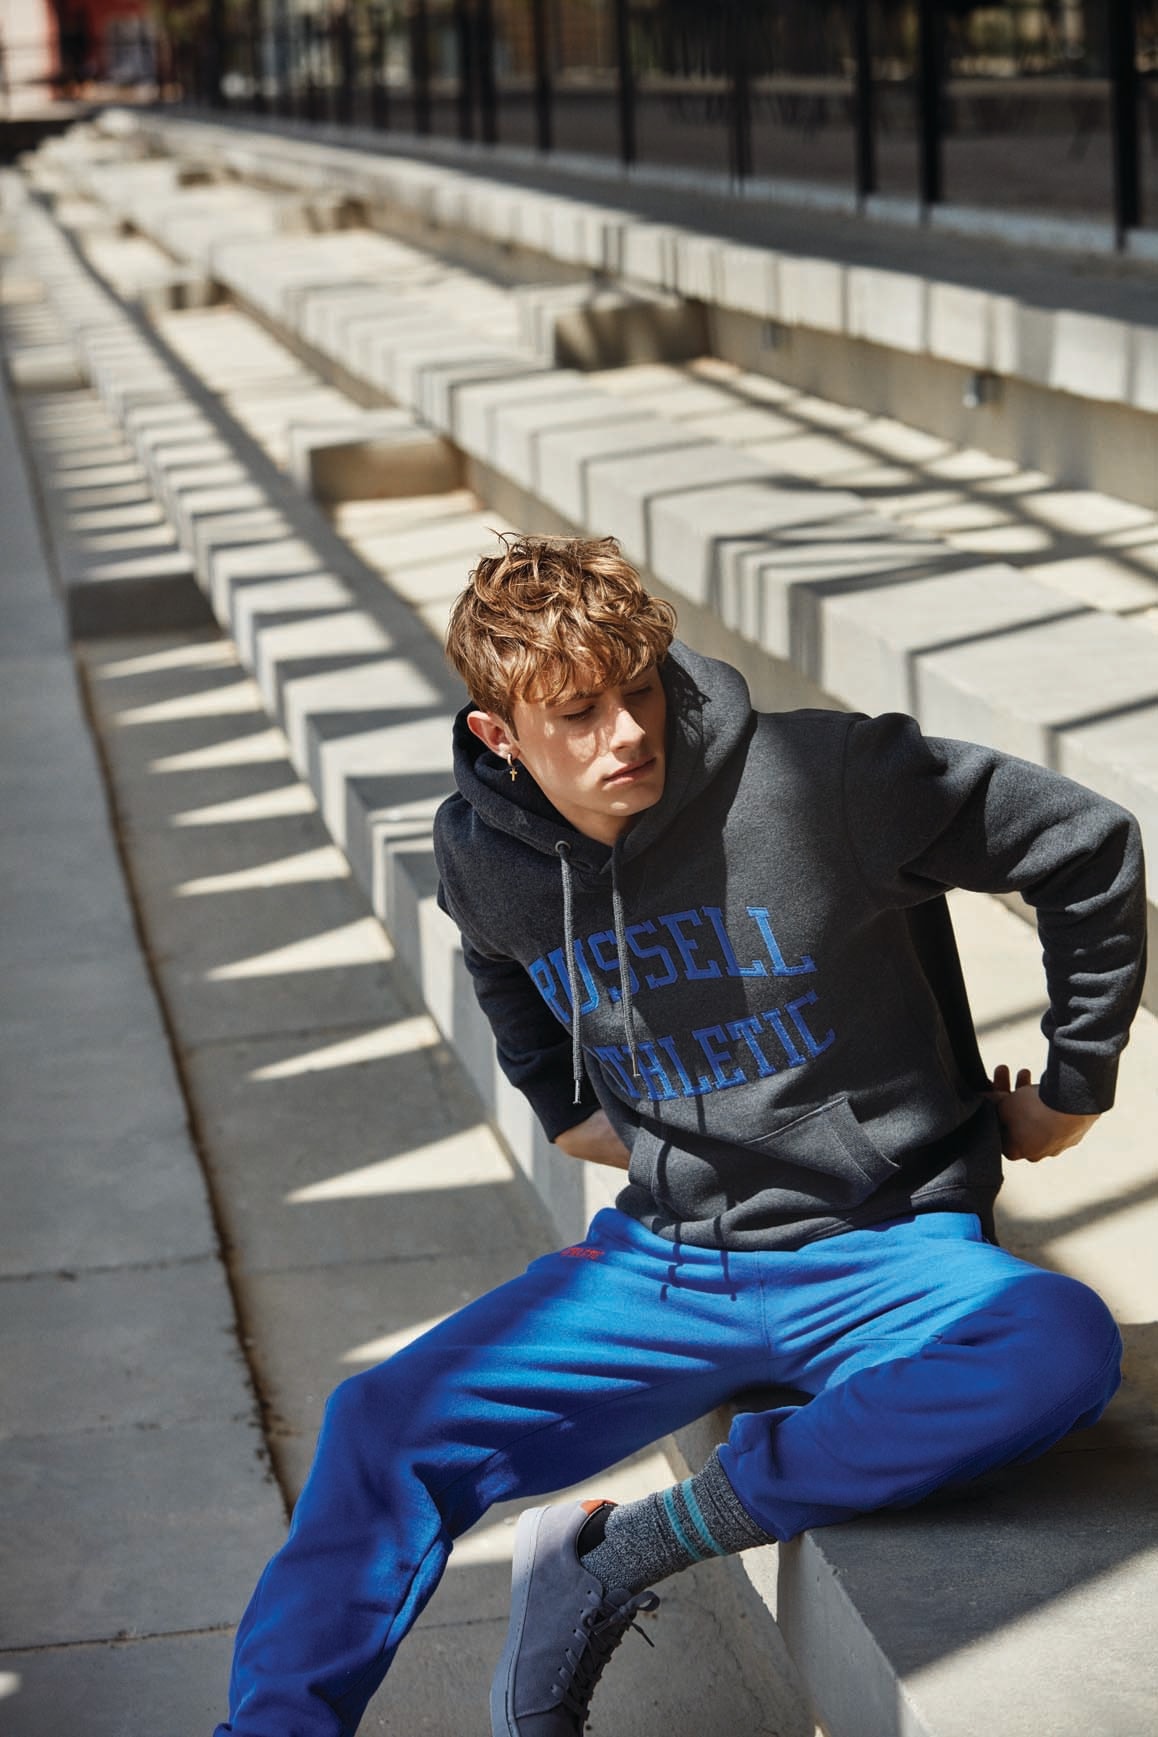 Russell Athletic Collection Printemps Ete 2019 Lookbook